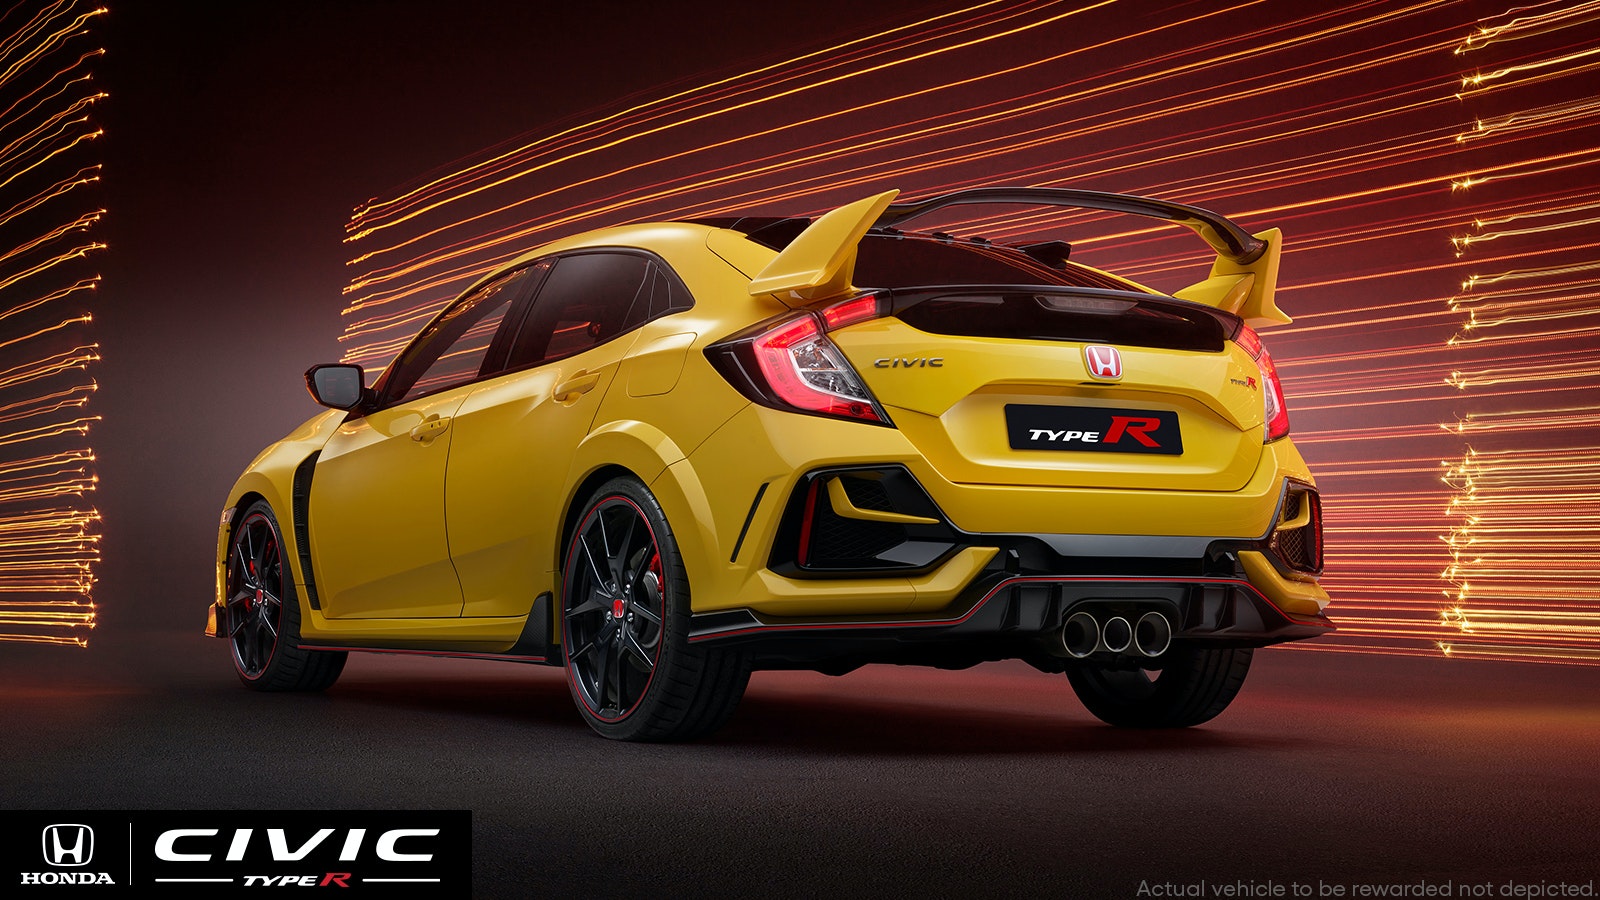 Win a Limited Edition Honda Civic Type R